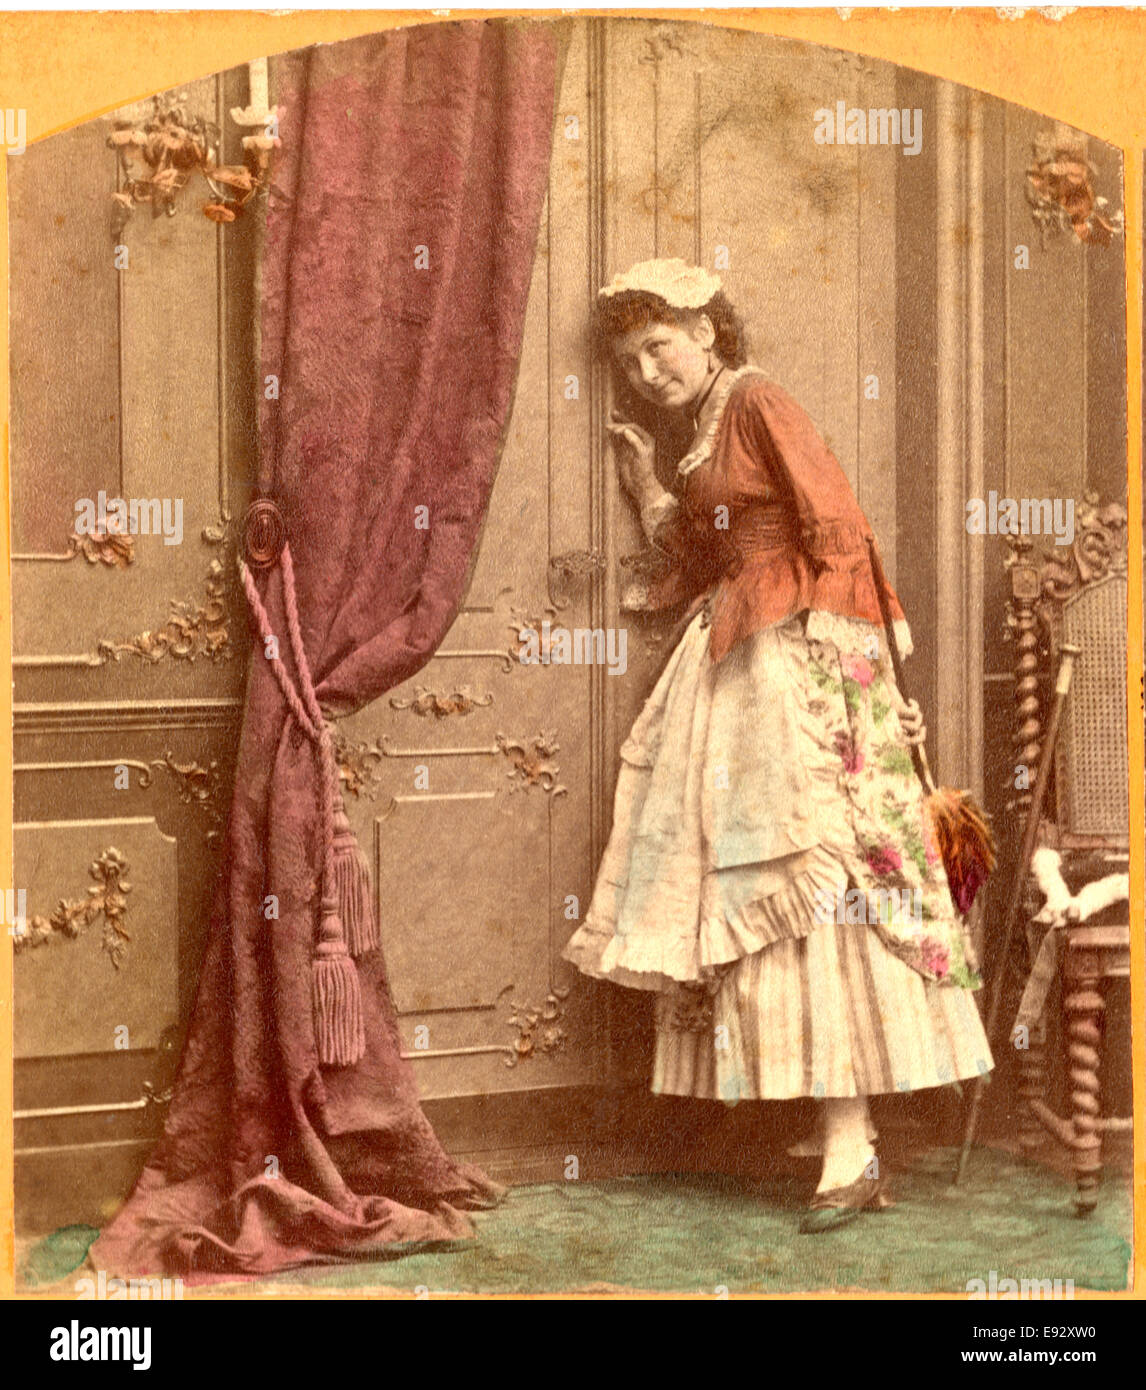 Maid with Feather Duster Eavesdropping at Door, Single Image of Stereo Card, circa early 1900's Stock Photo